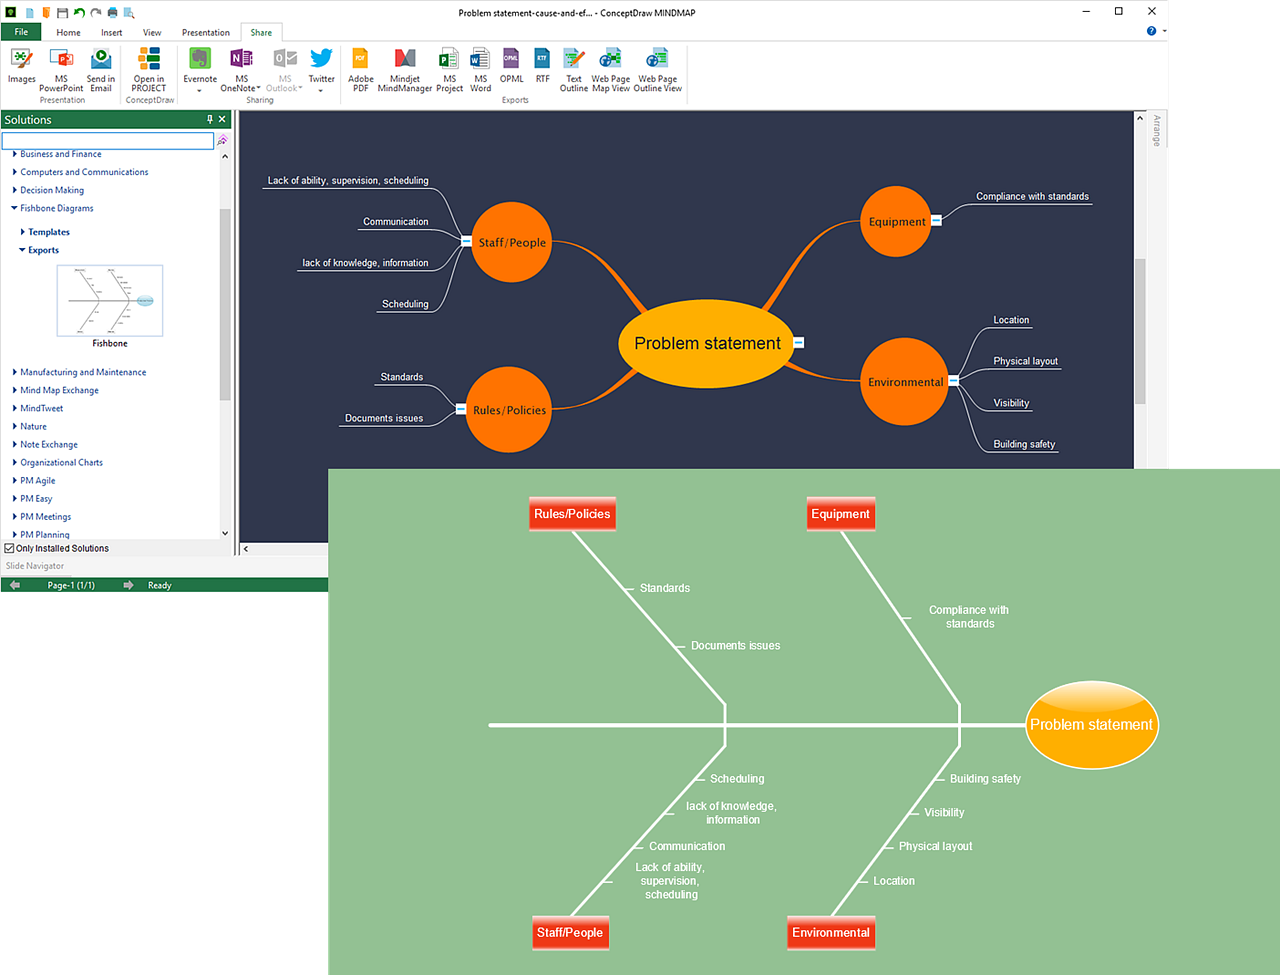 conceptdraw-mindmap-what-is-new